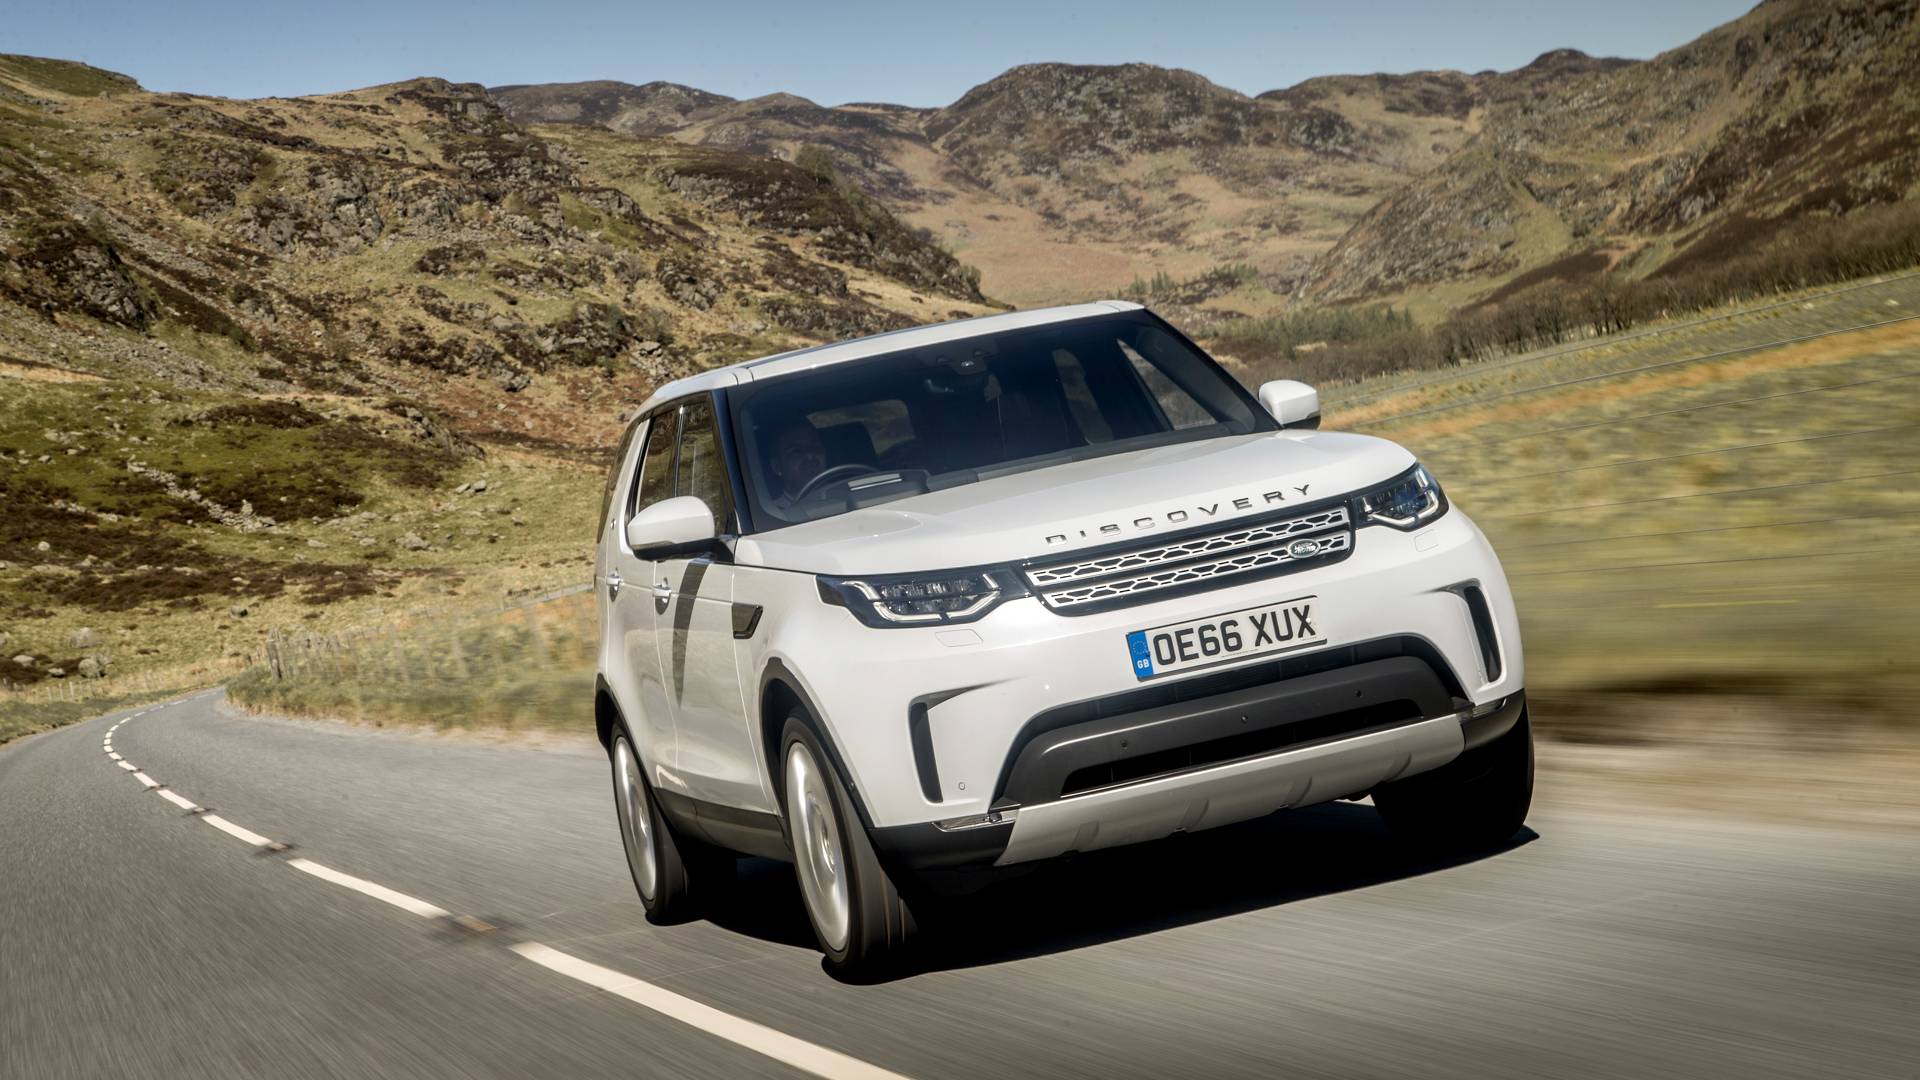 2017 Land Rover Discovery review: worthy of the iconic name